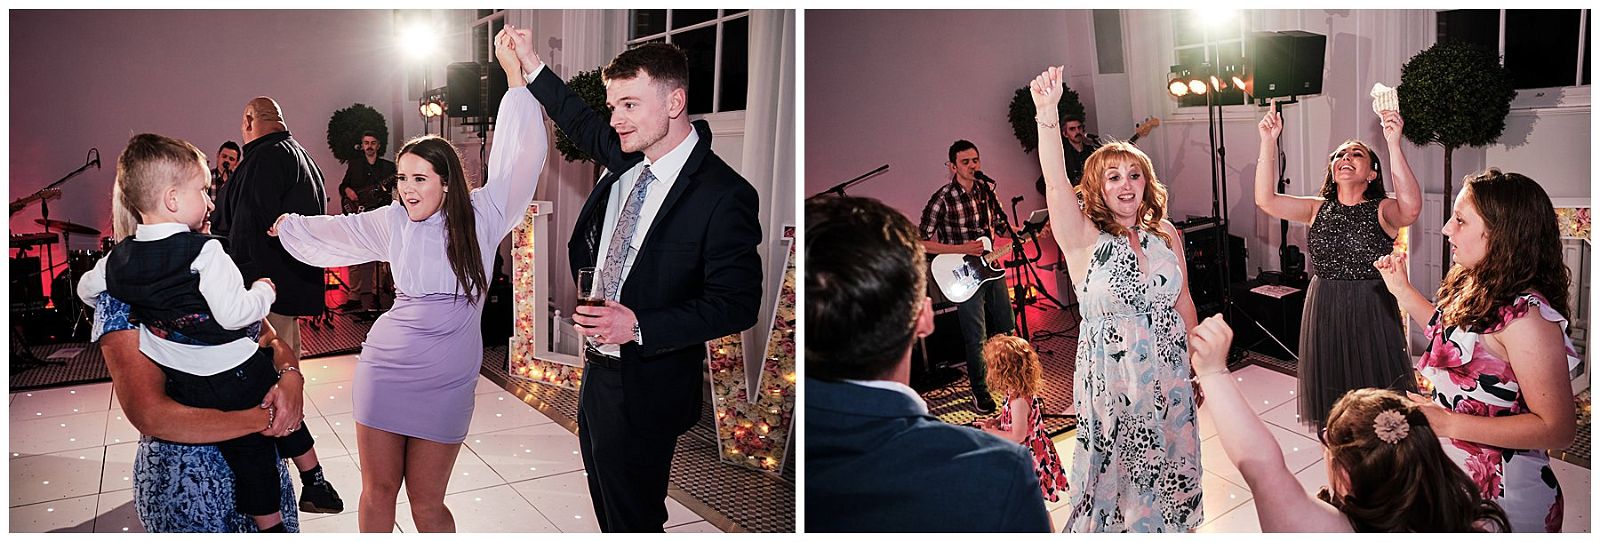 As the party really gets started and serious shapes are thrown on the dance floor, there are seriously great moments to be captured at Hawkstone Hall in Shrewsbury by Documentary Wedding Photographer Stuart James